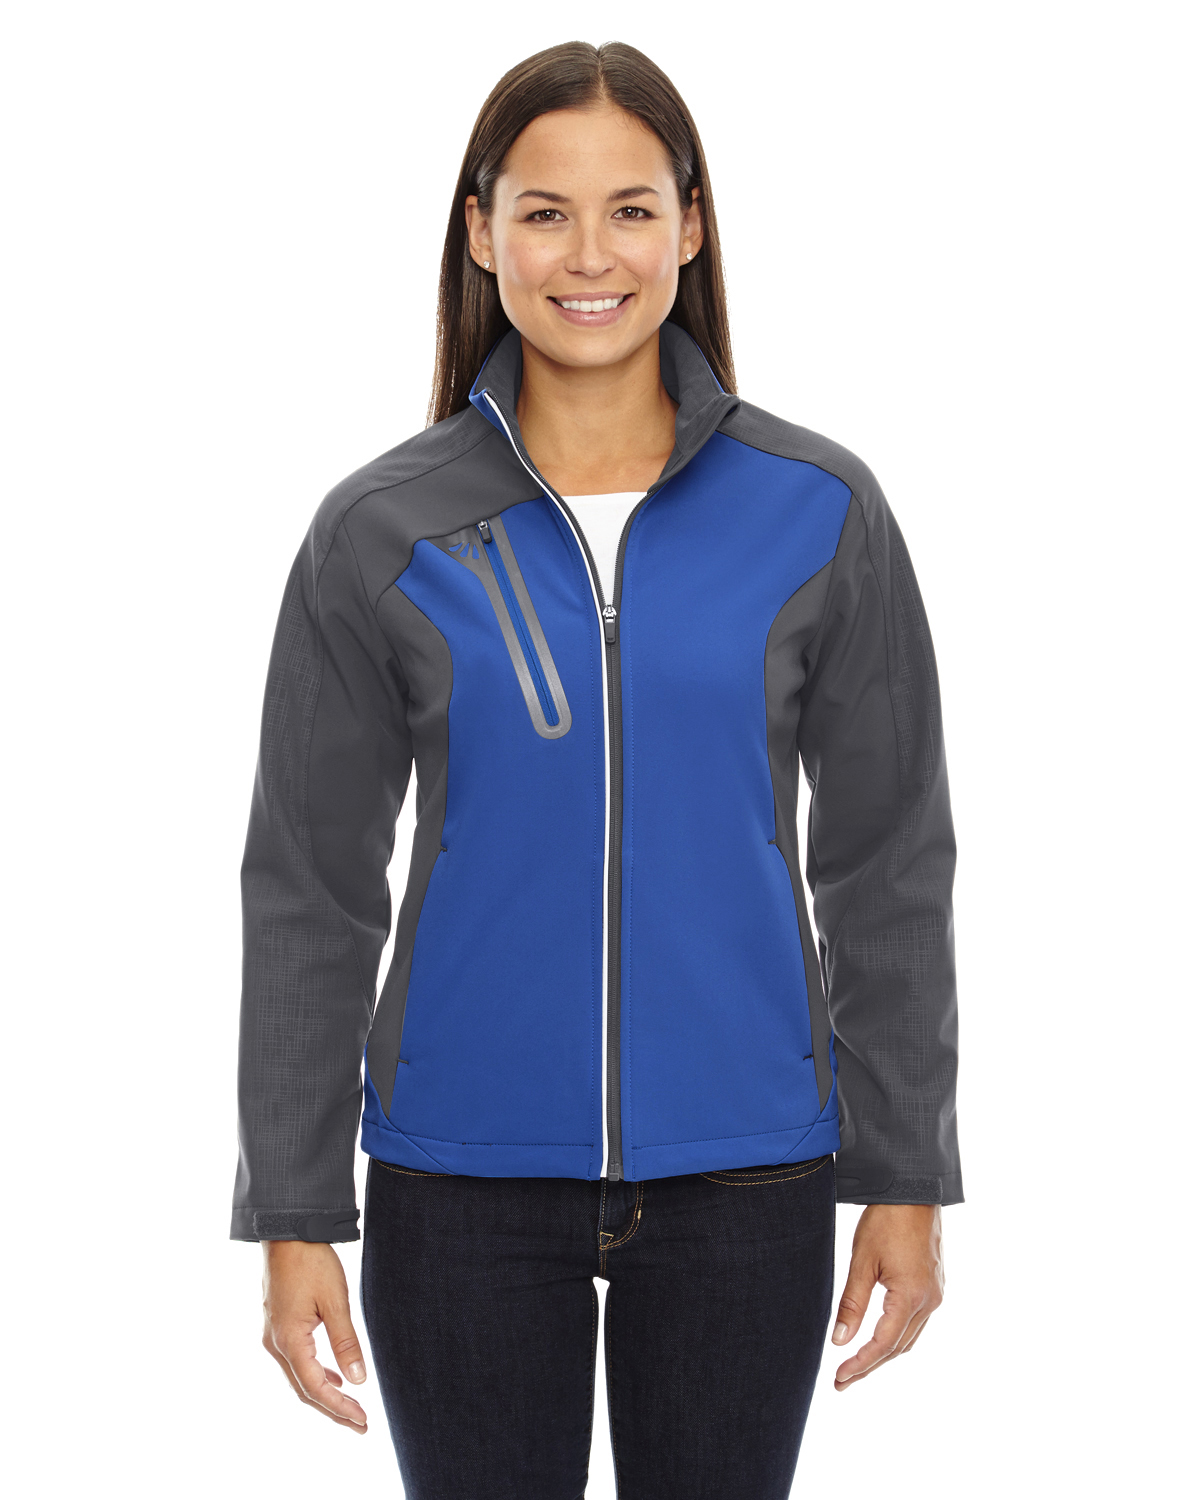 The Ash City - North End Ladies' Terrain Colorblock Soft Shell with Embossed Print - NAUTICL BLUE 413 - S - image 1 of 2